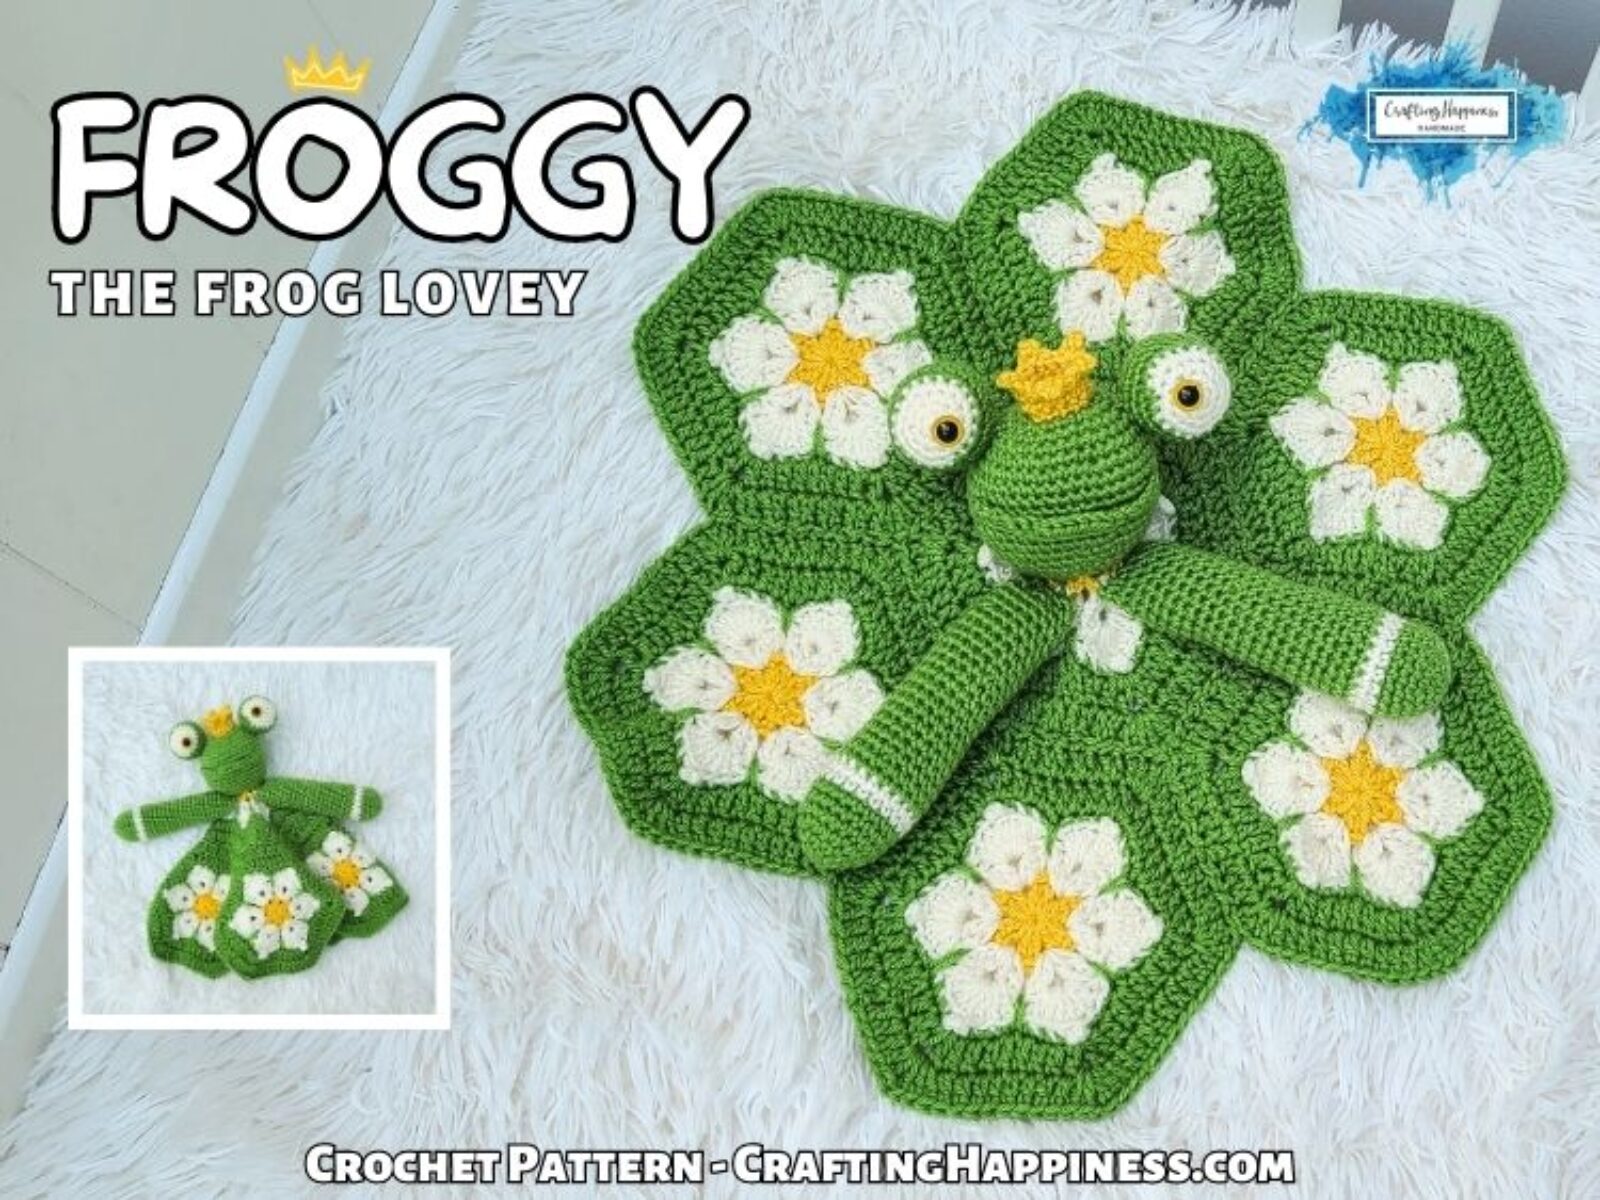 FACEBOOK BLOG POSTER - Froggy The Frog Lovey - Crafting Happiness